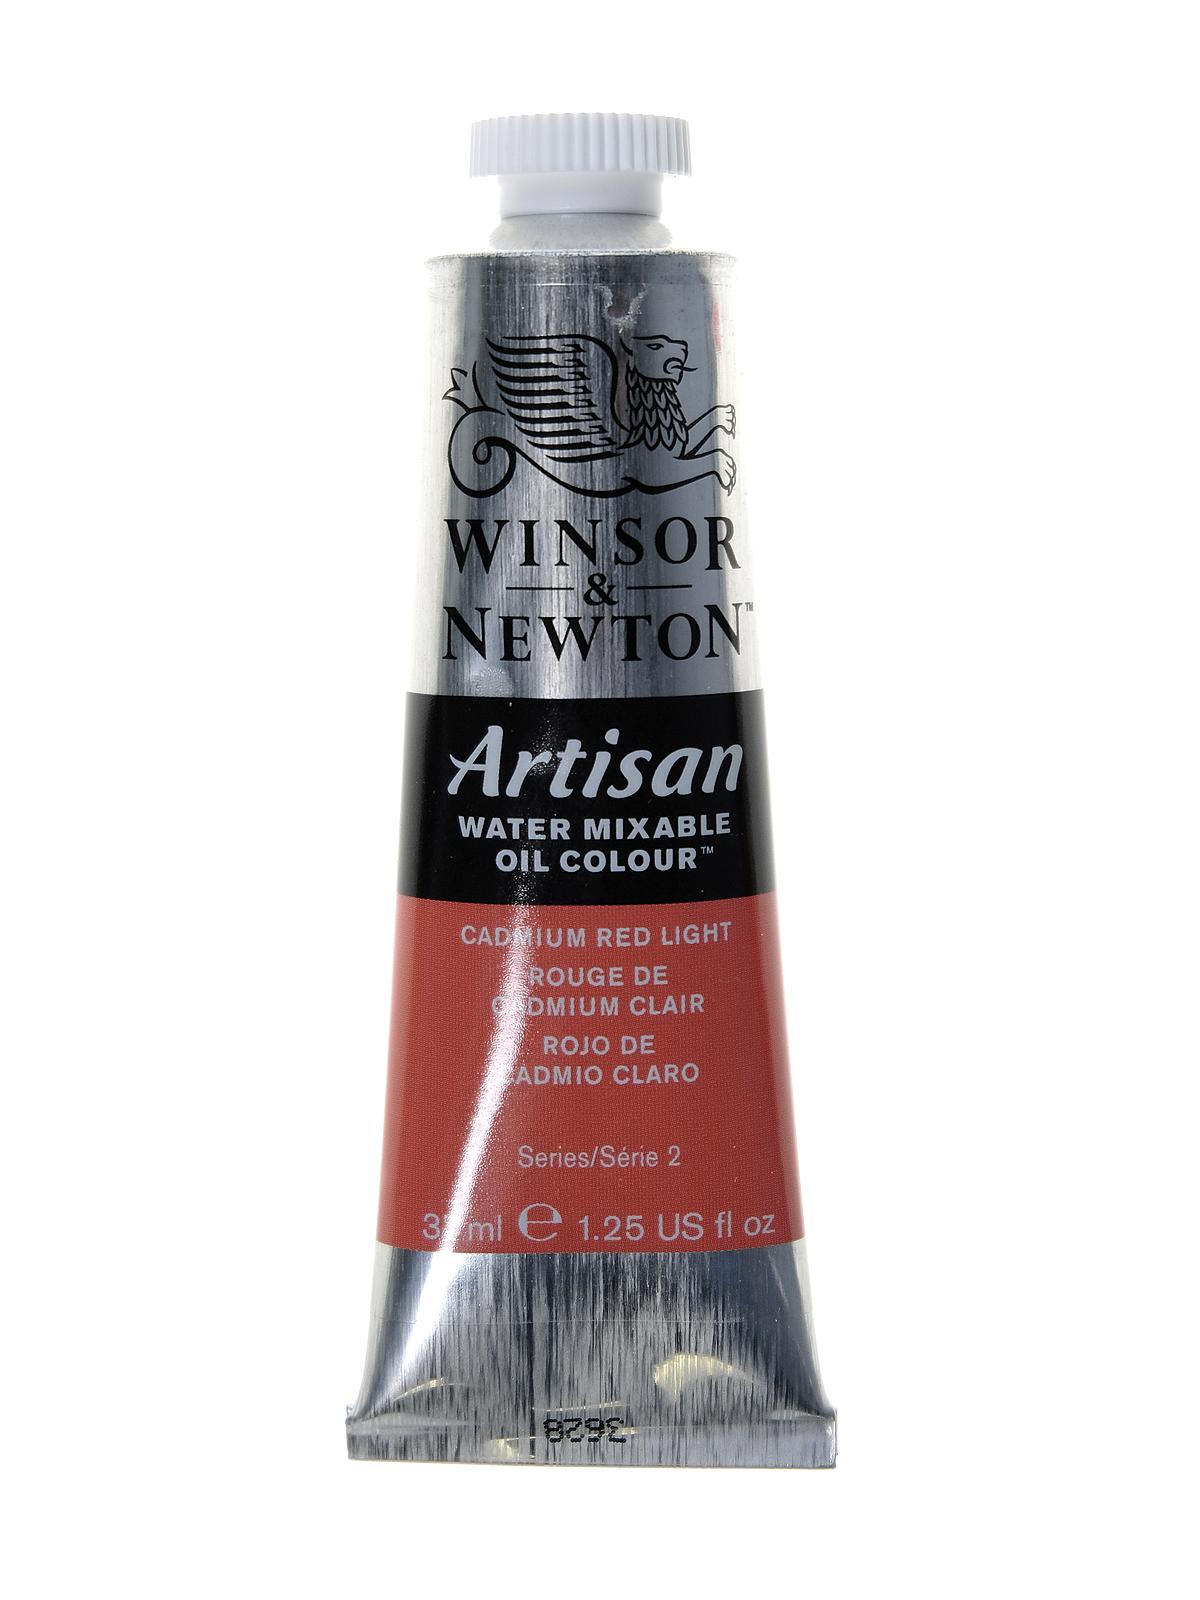 Artisan Water Mixable Oil Colours Cadmium Red Light 37 Ml 100